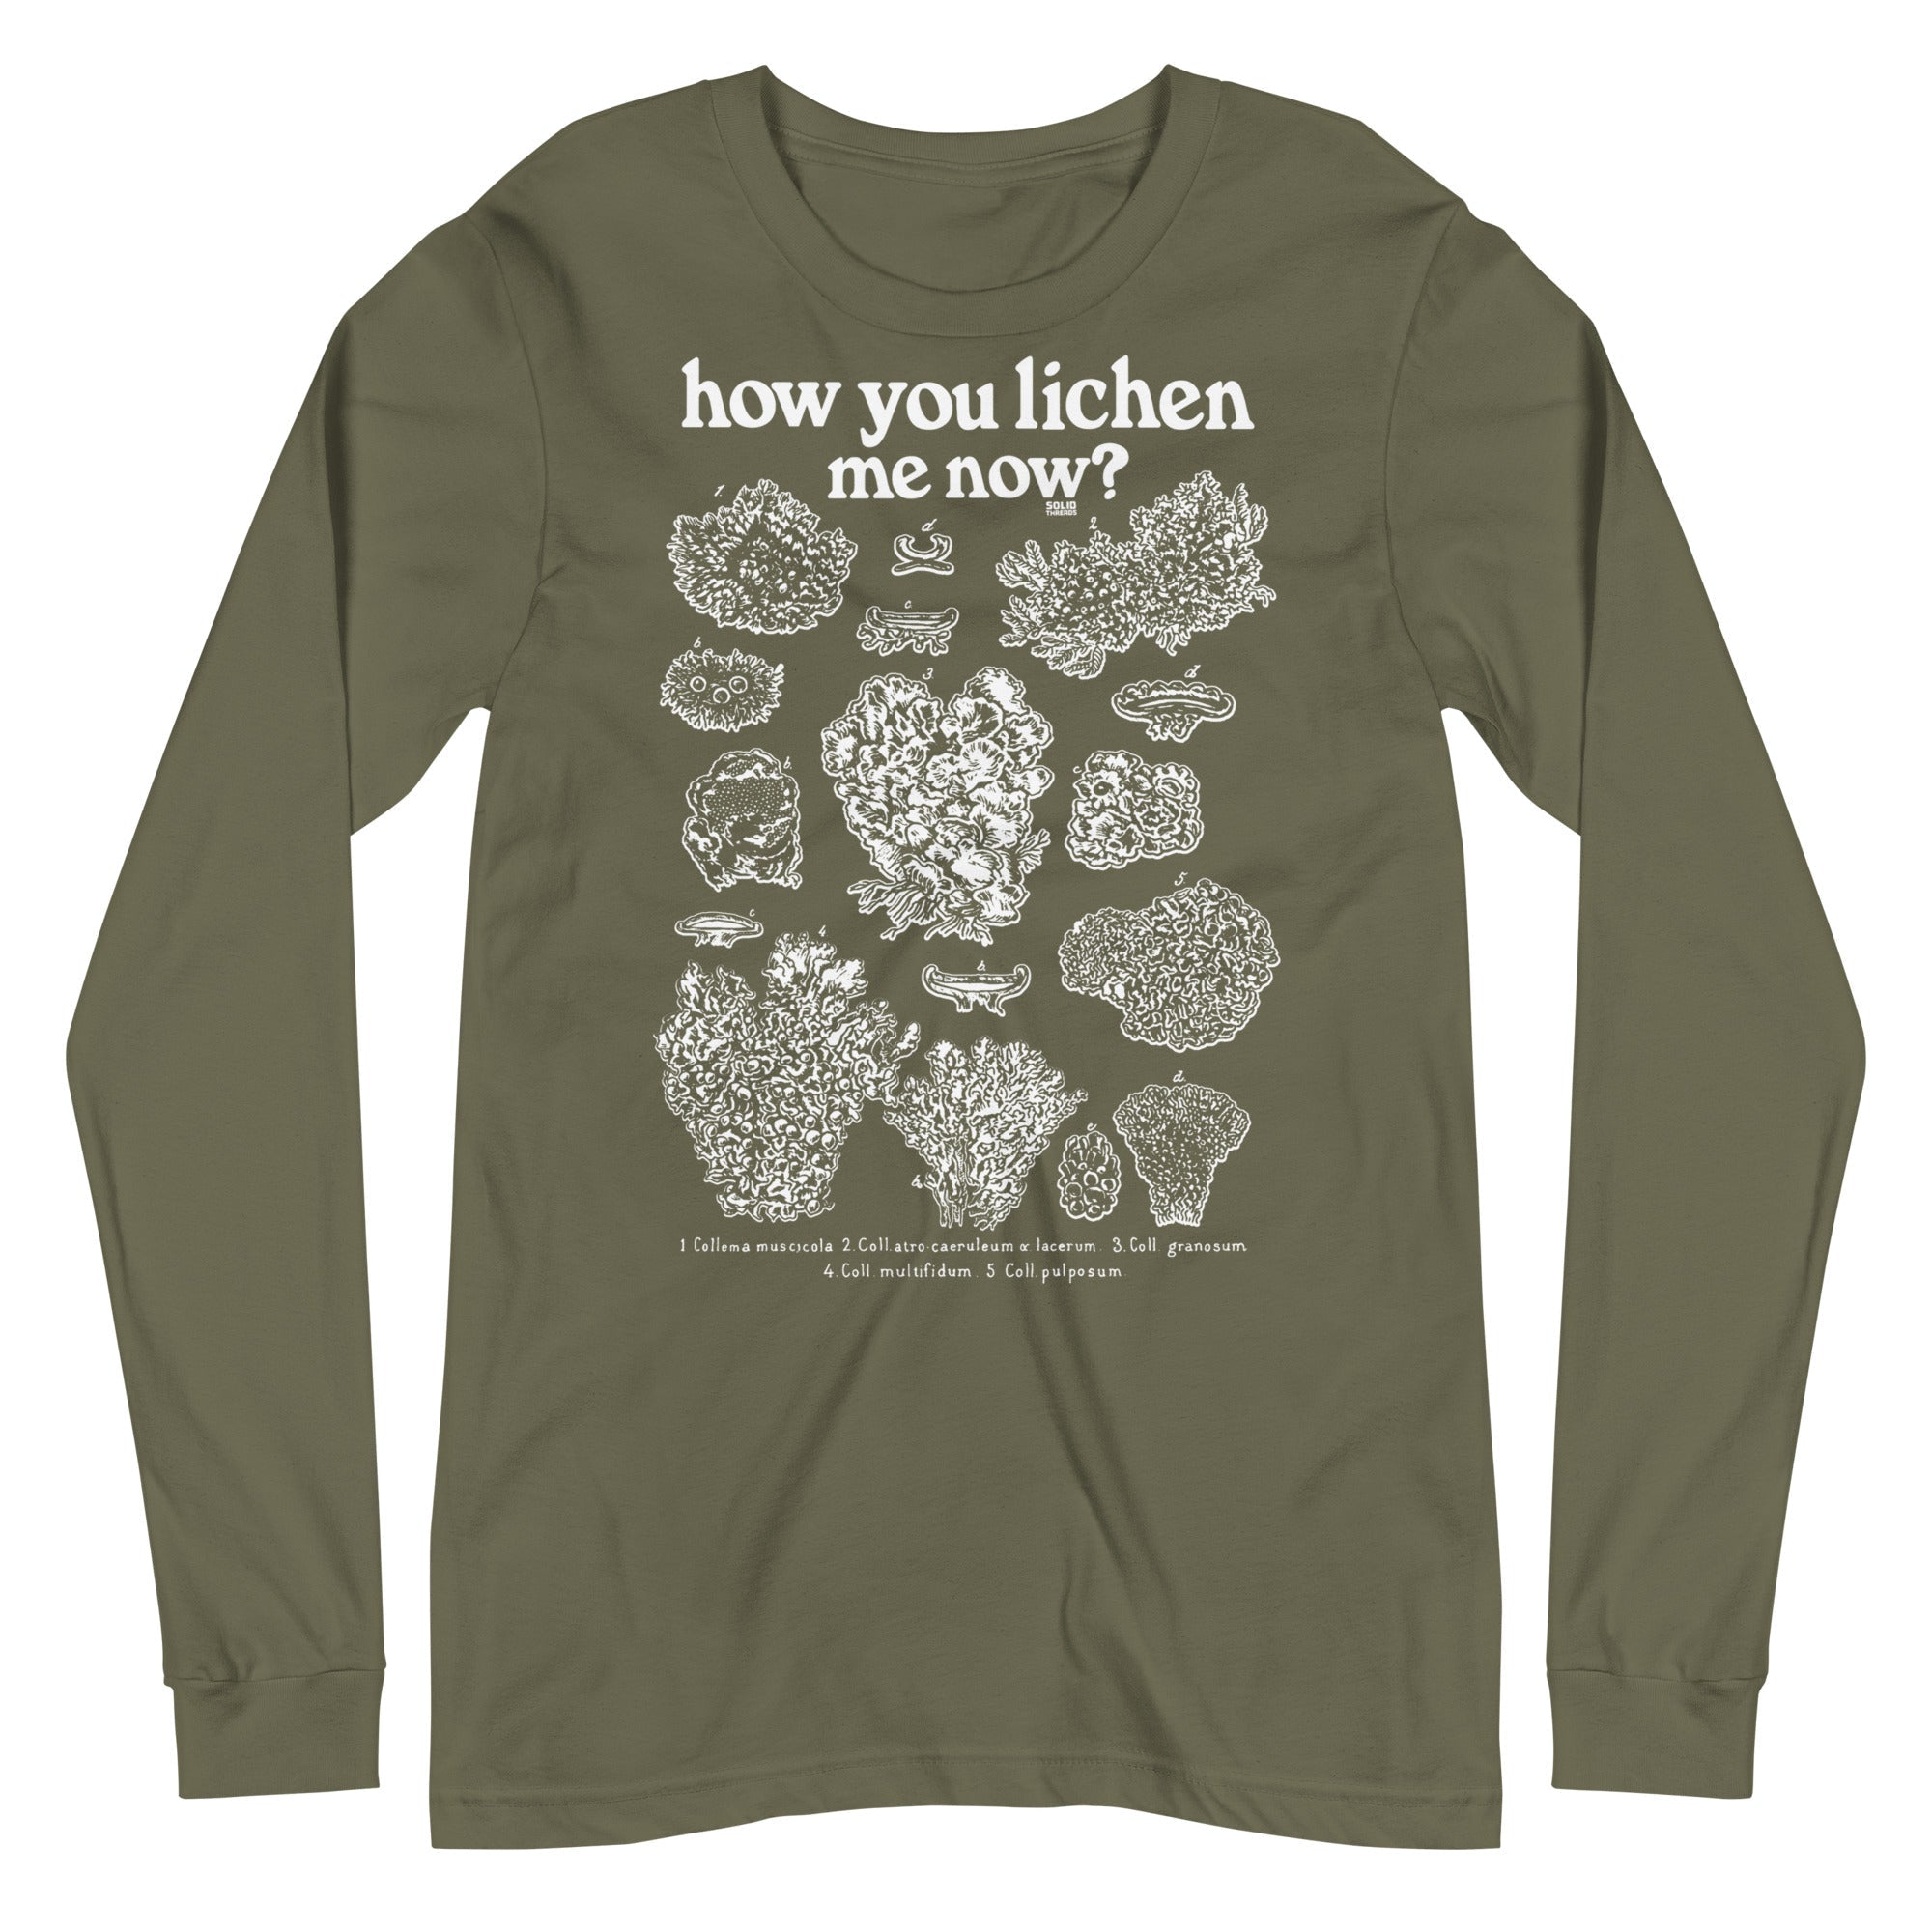 How You Lichen Me Now Vintage Graphic Long Sleeve Tee | Funny Fungi T-Shirt Military Green - Solid Threads